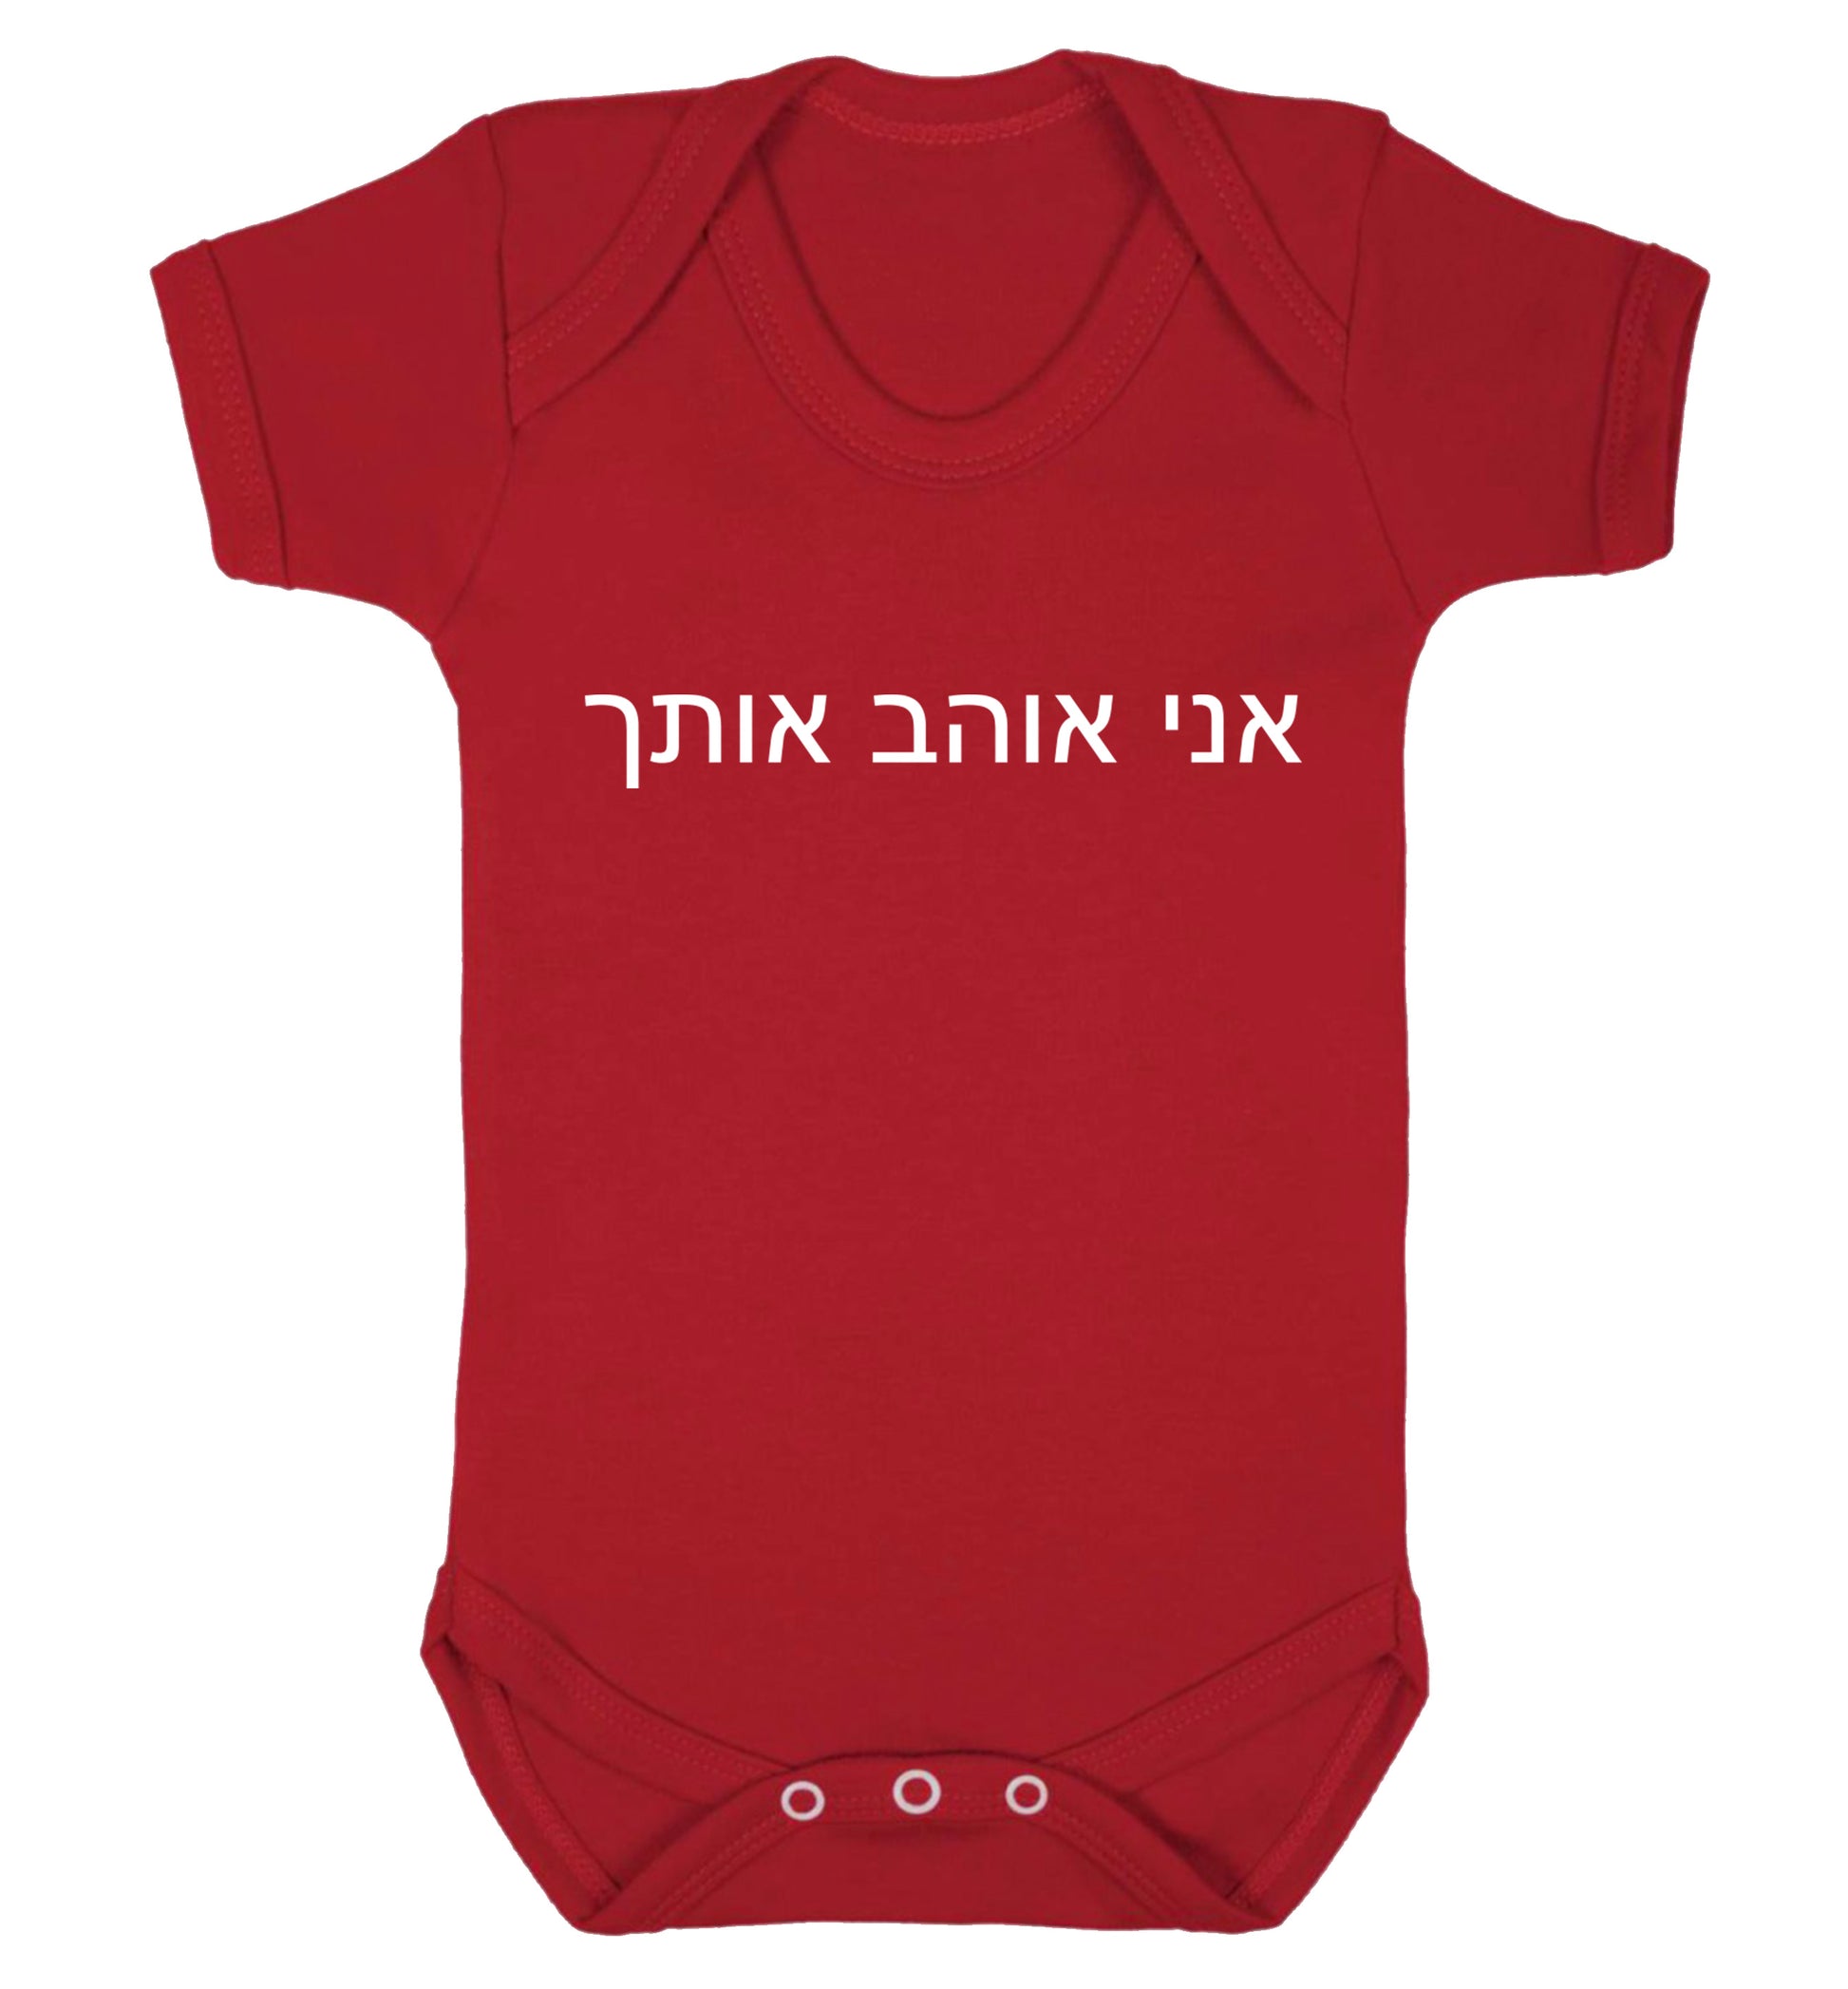 ___ ____ ____ - I love you Baby Vest red 18-24 months